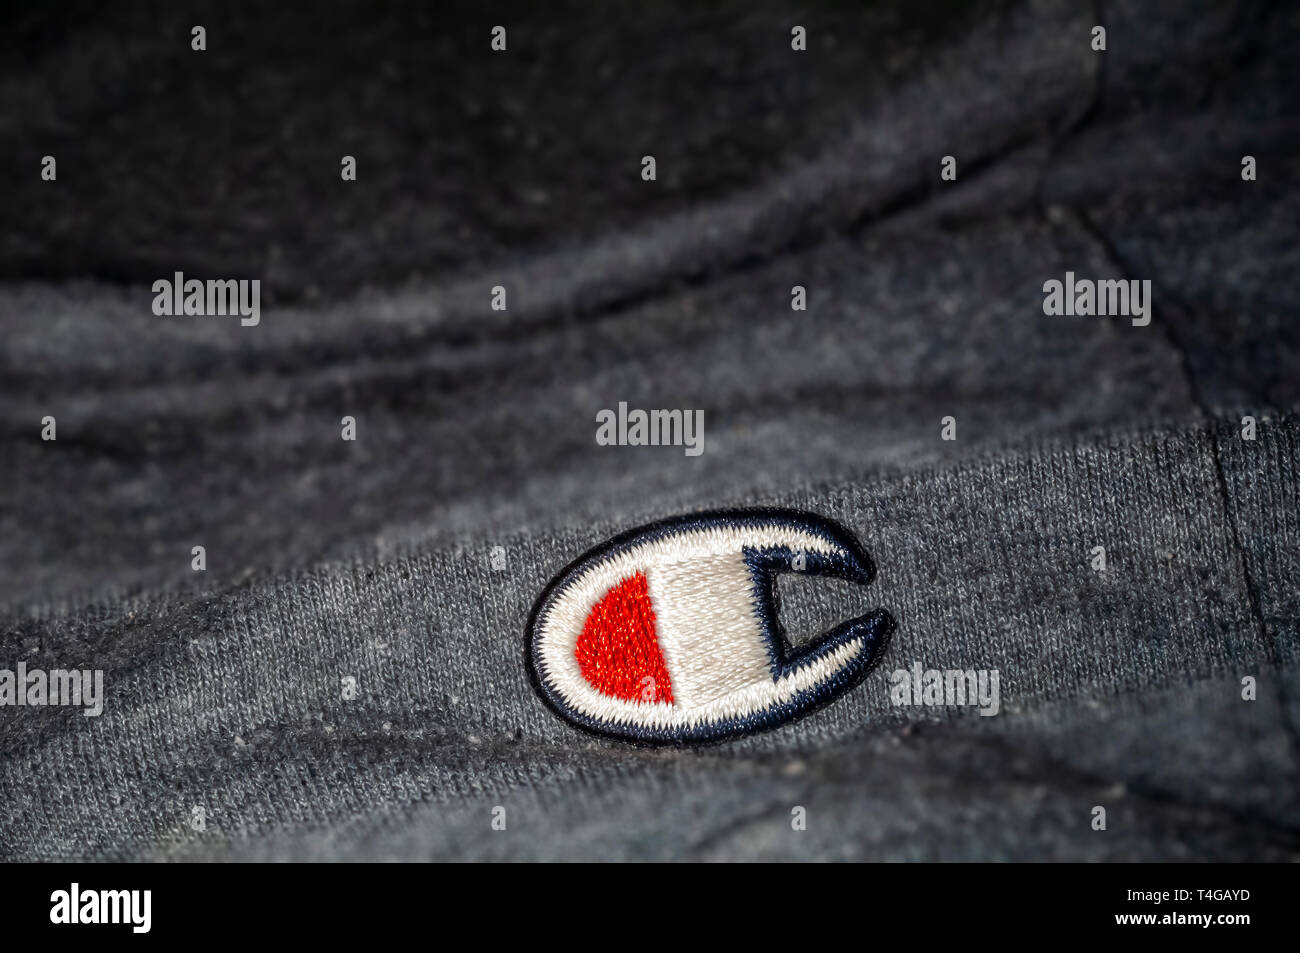 The logo of the sports apparel company Champion on gym shorts in New York on Tuesday, April 16, 2019.  Champion, a brand of HanesBrands Inc., has received a surge in popularity, seeing double-digit growth in sales during the last holiday season. (Â© Richard B. Levine) Stock Photo